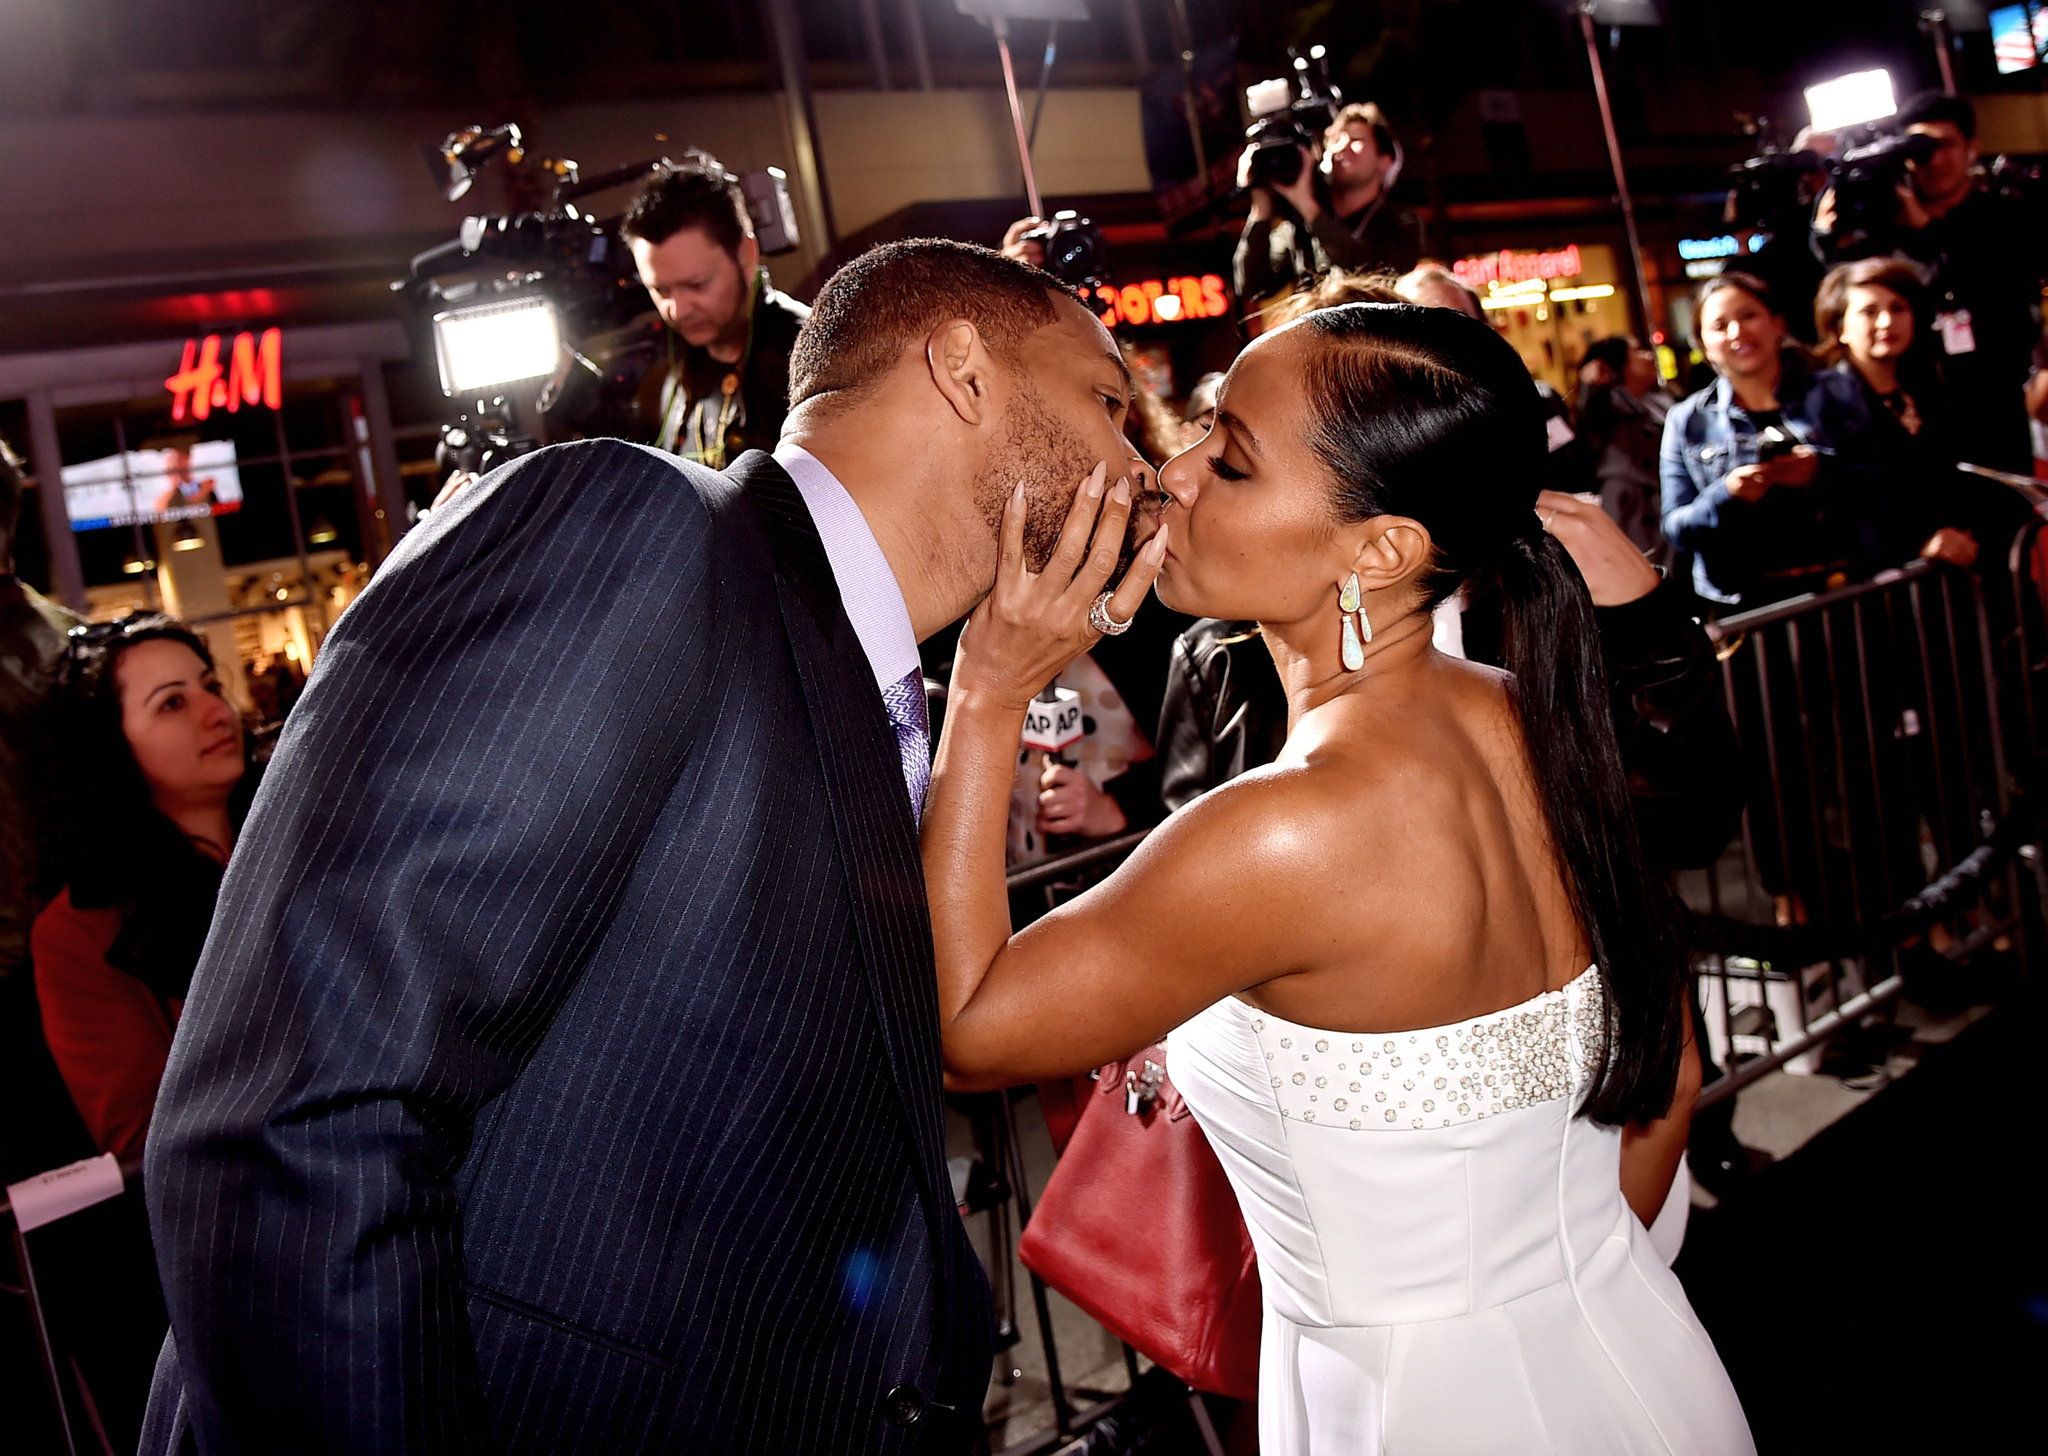 Will Smith and Jada Pinkett Smith at event of Susikaupk (2015)